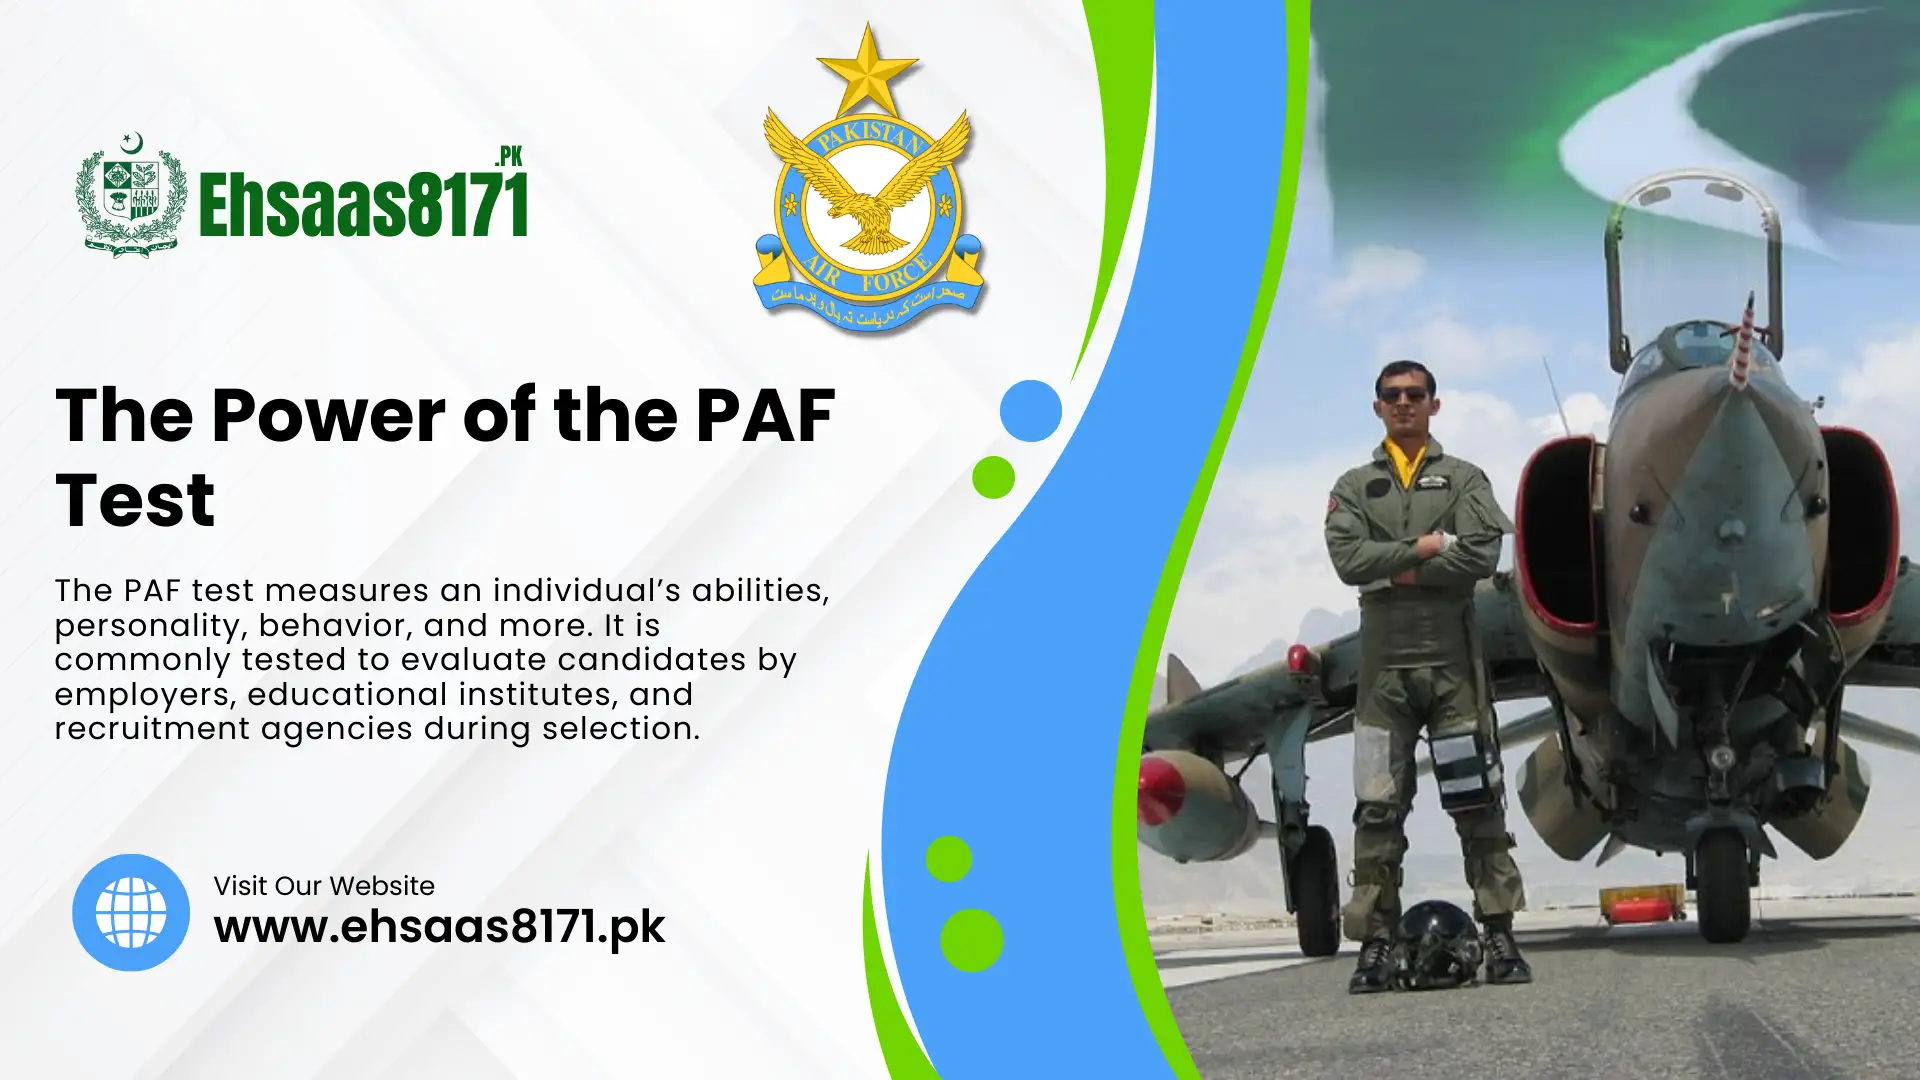 The Power of the PAF Test